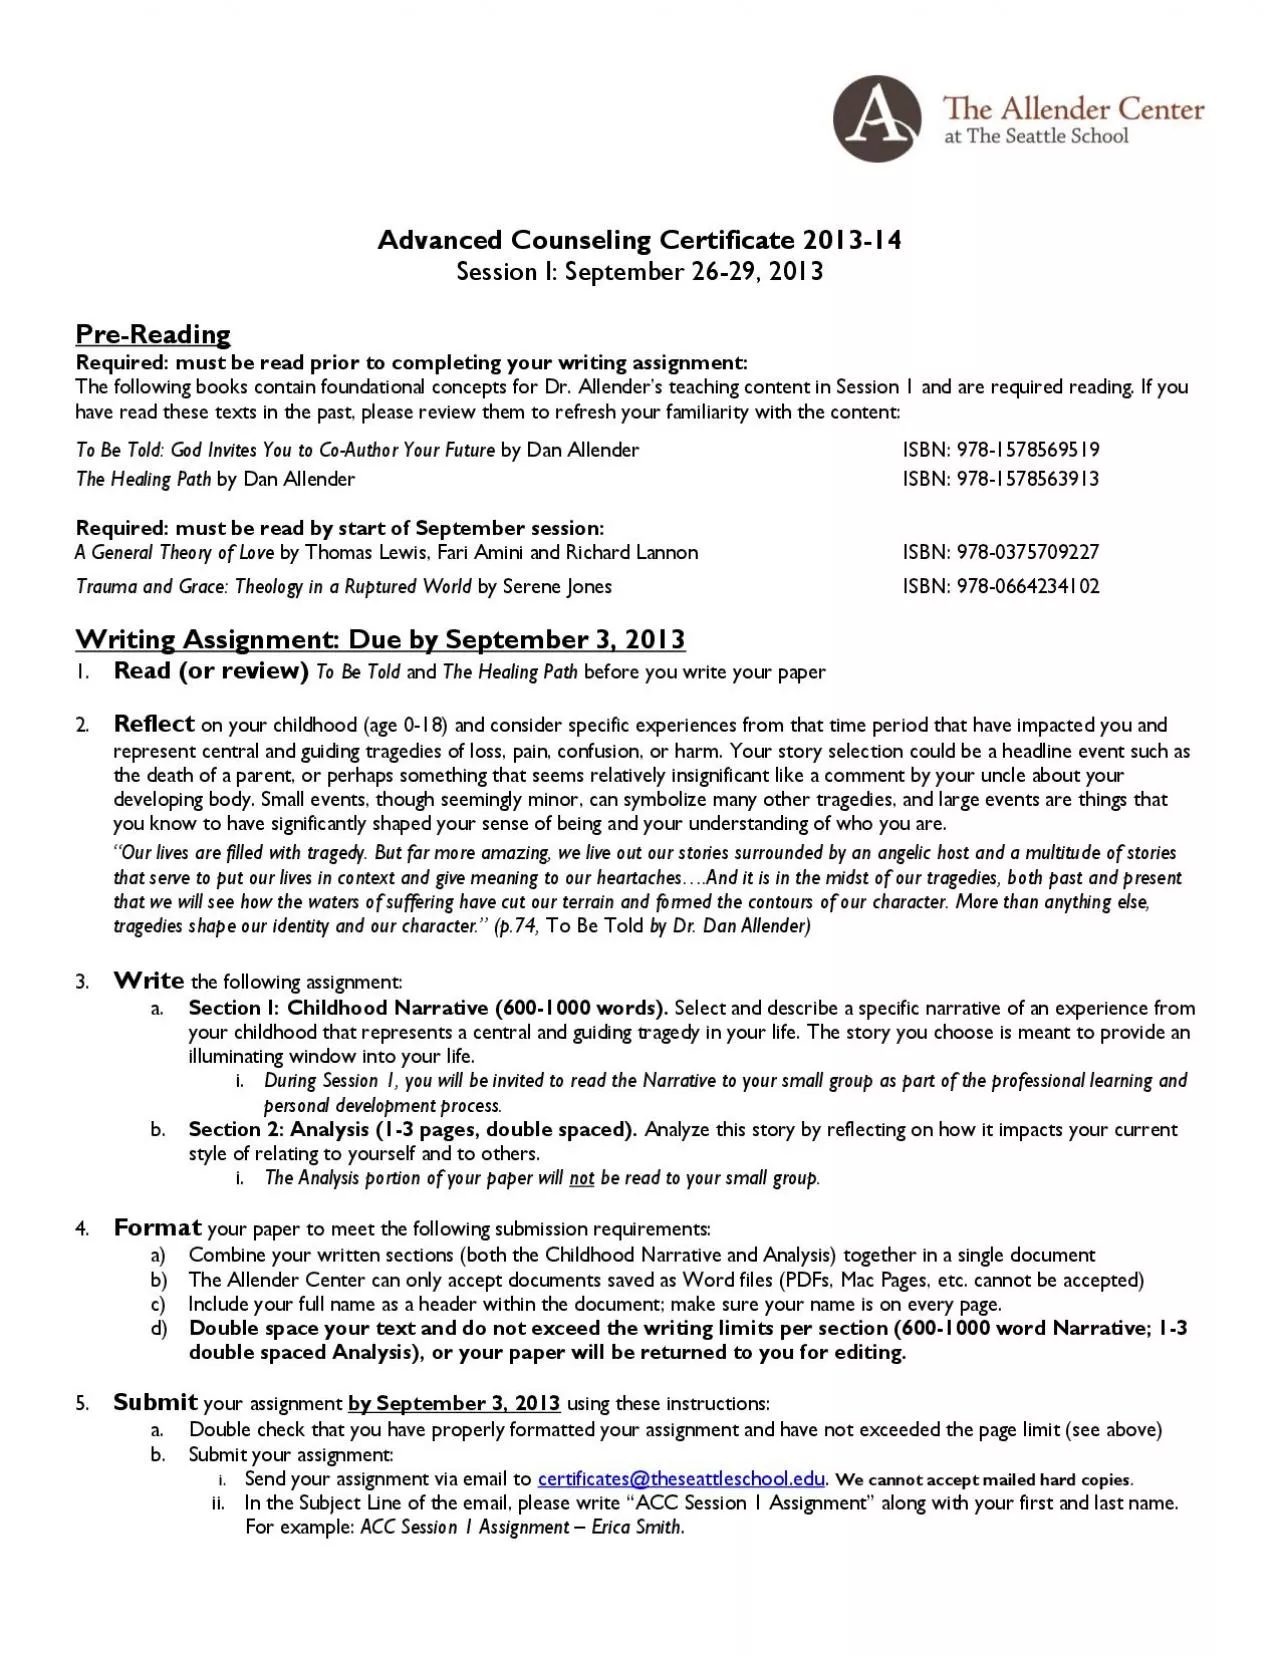 Advanced Counseling Certificate